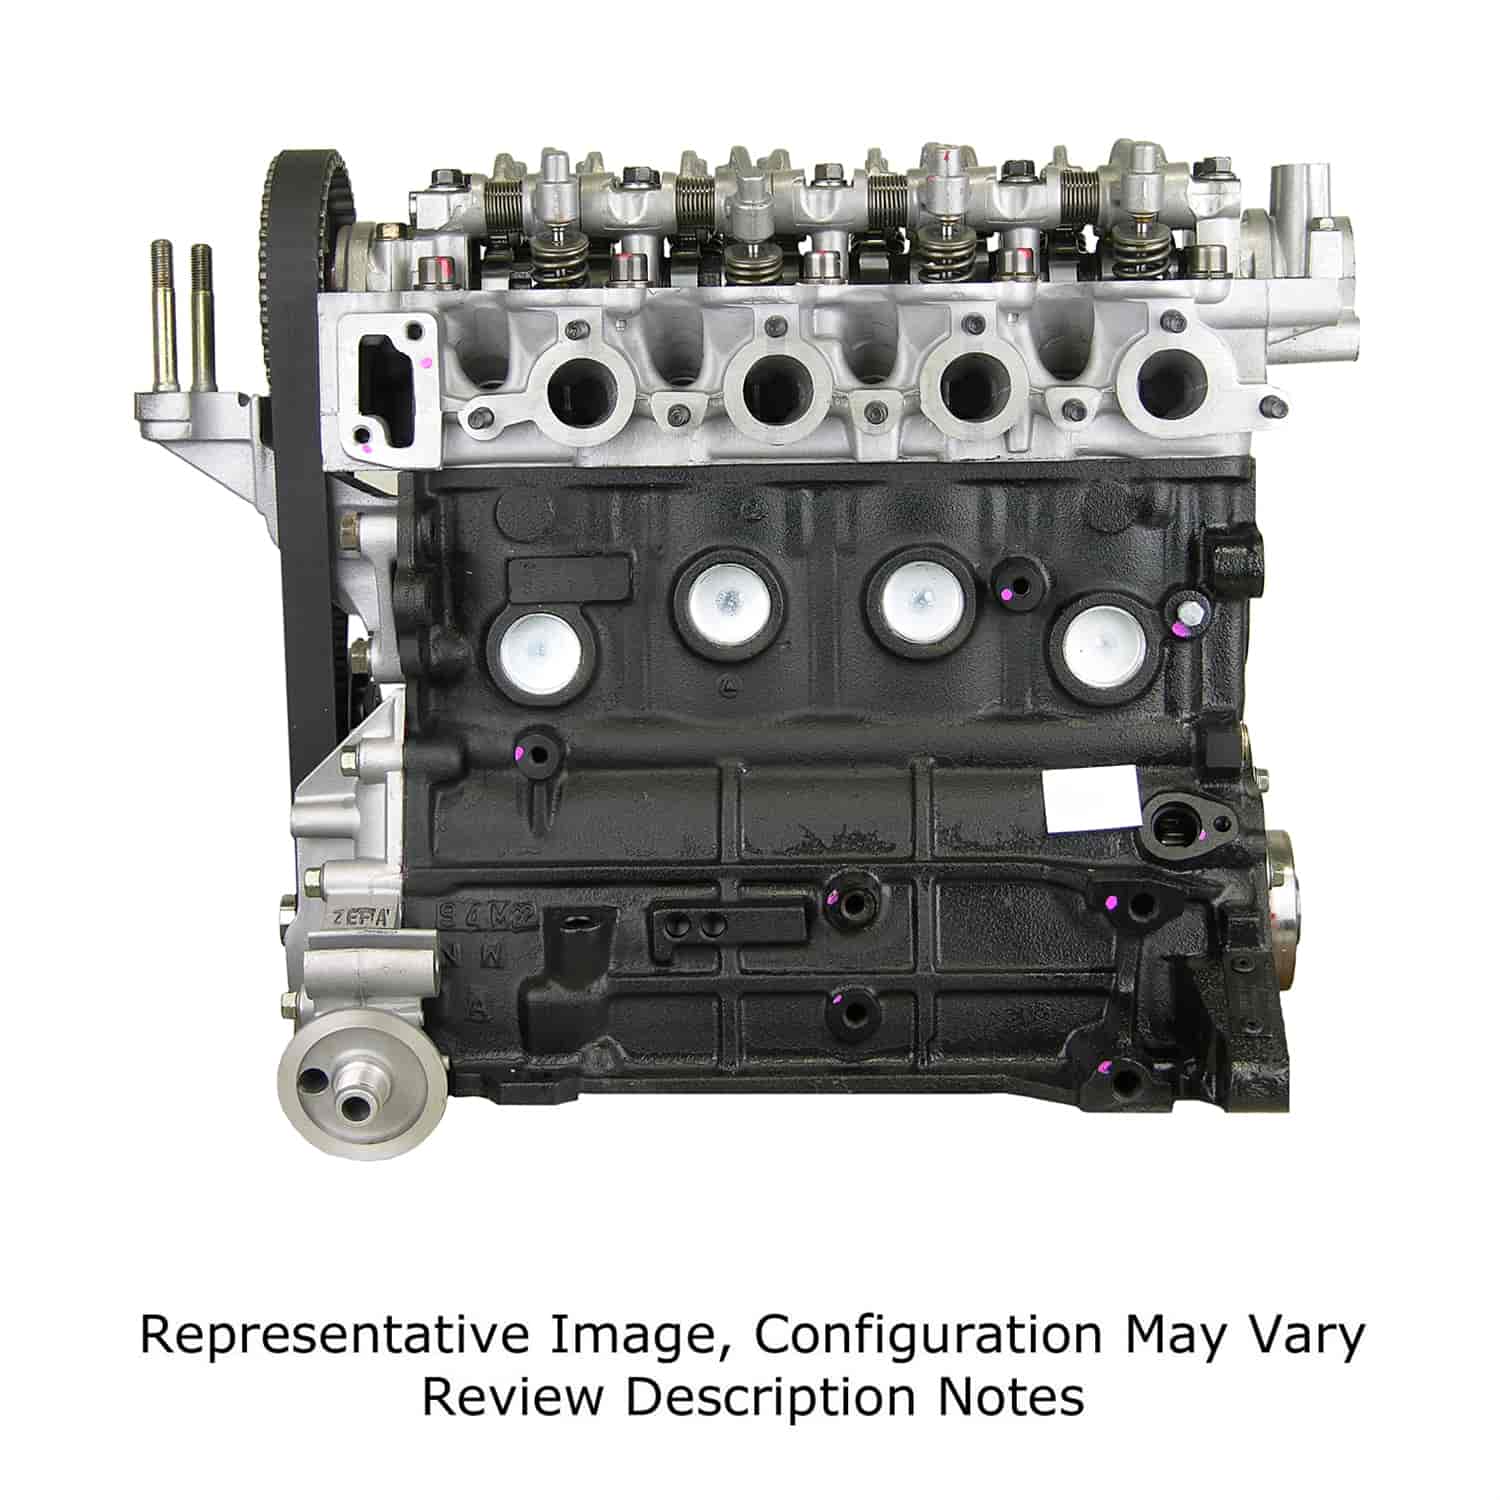 Remanufactured Crate Engine for 1995 Hyundai Scoupe with 1.5L L4